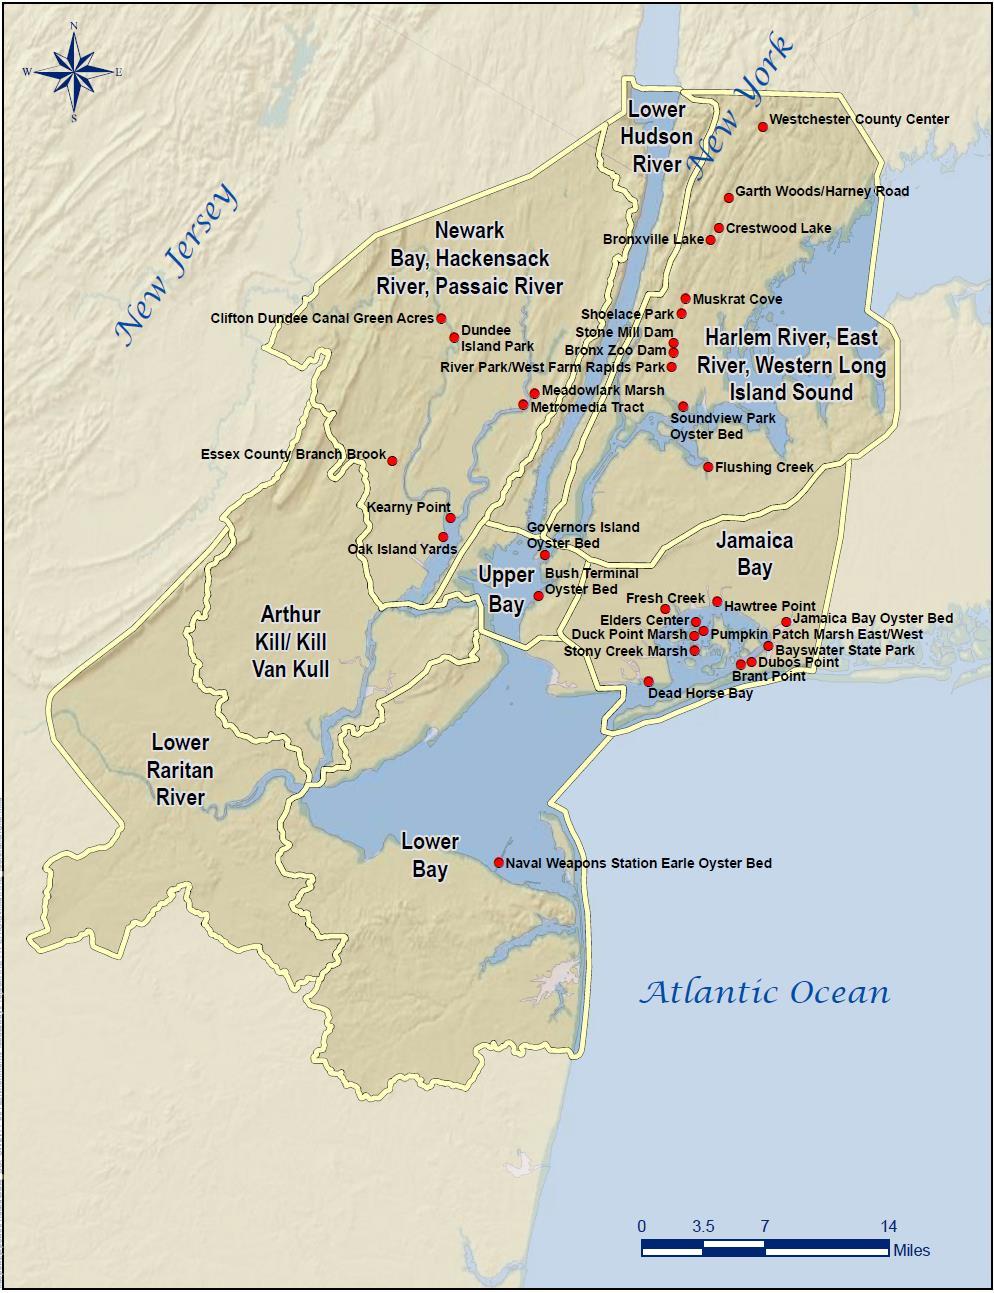 HARLEM RIVER, EAST RIVER AND WESTERN LONG ISLAND SOUND PLANNING REGION Flushing Bay and Creek Ecosystem Restoration Source Feasibility Study Background Study Resolution (1994), Reconnaissance Report